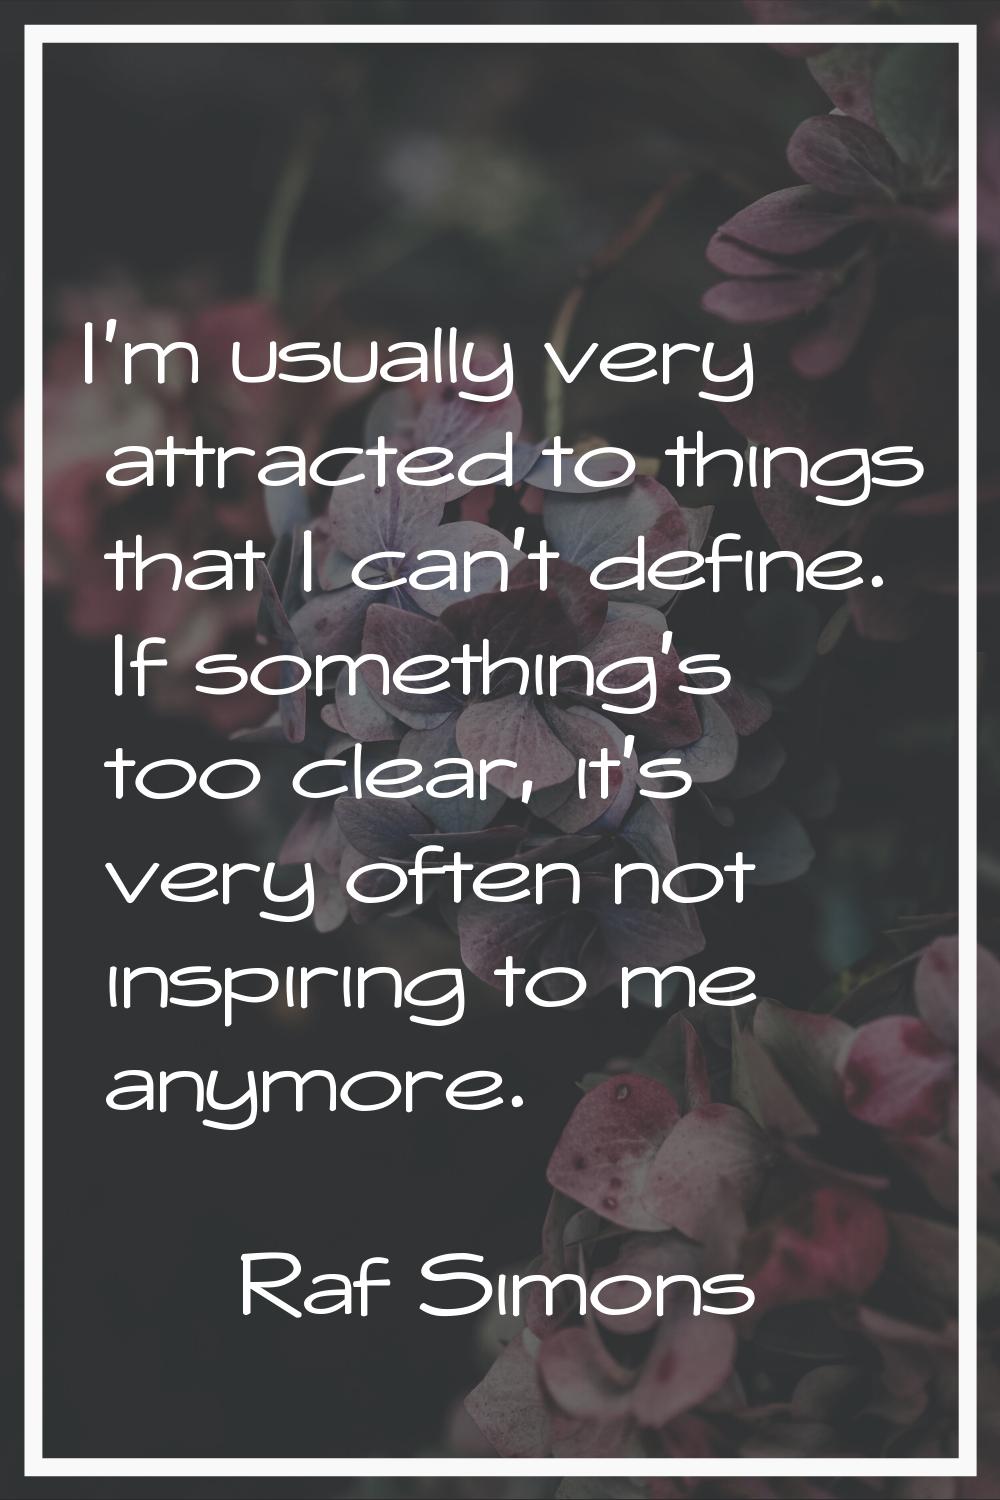 I'm usually very attracted to things that I can't define. If something's too clear, it's very often